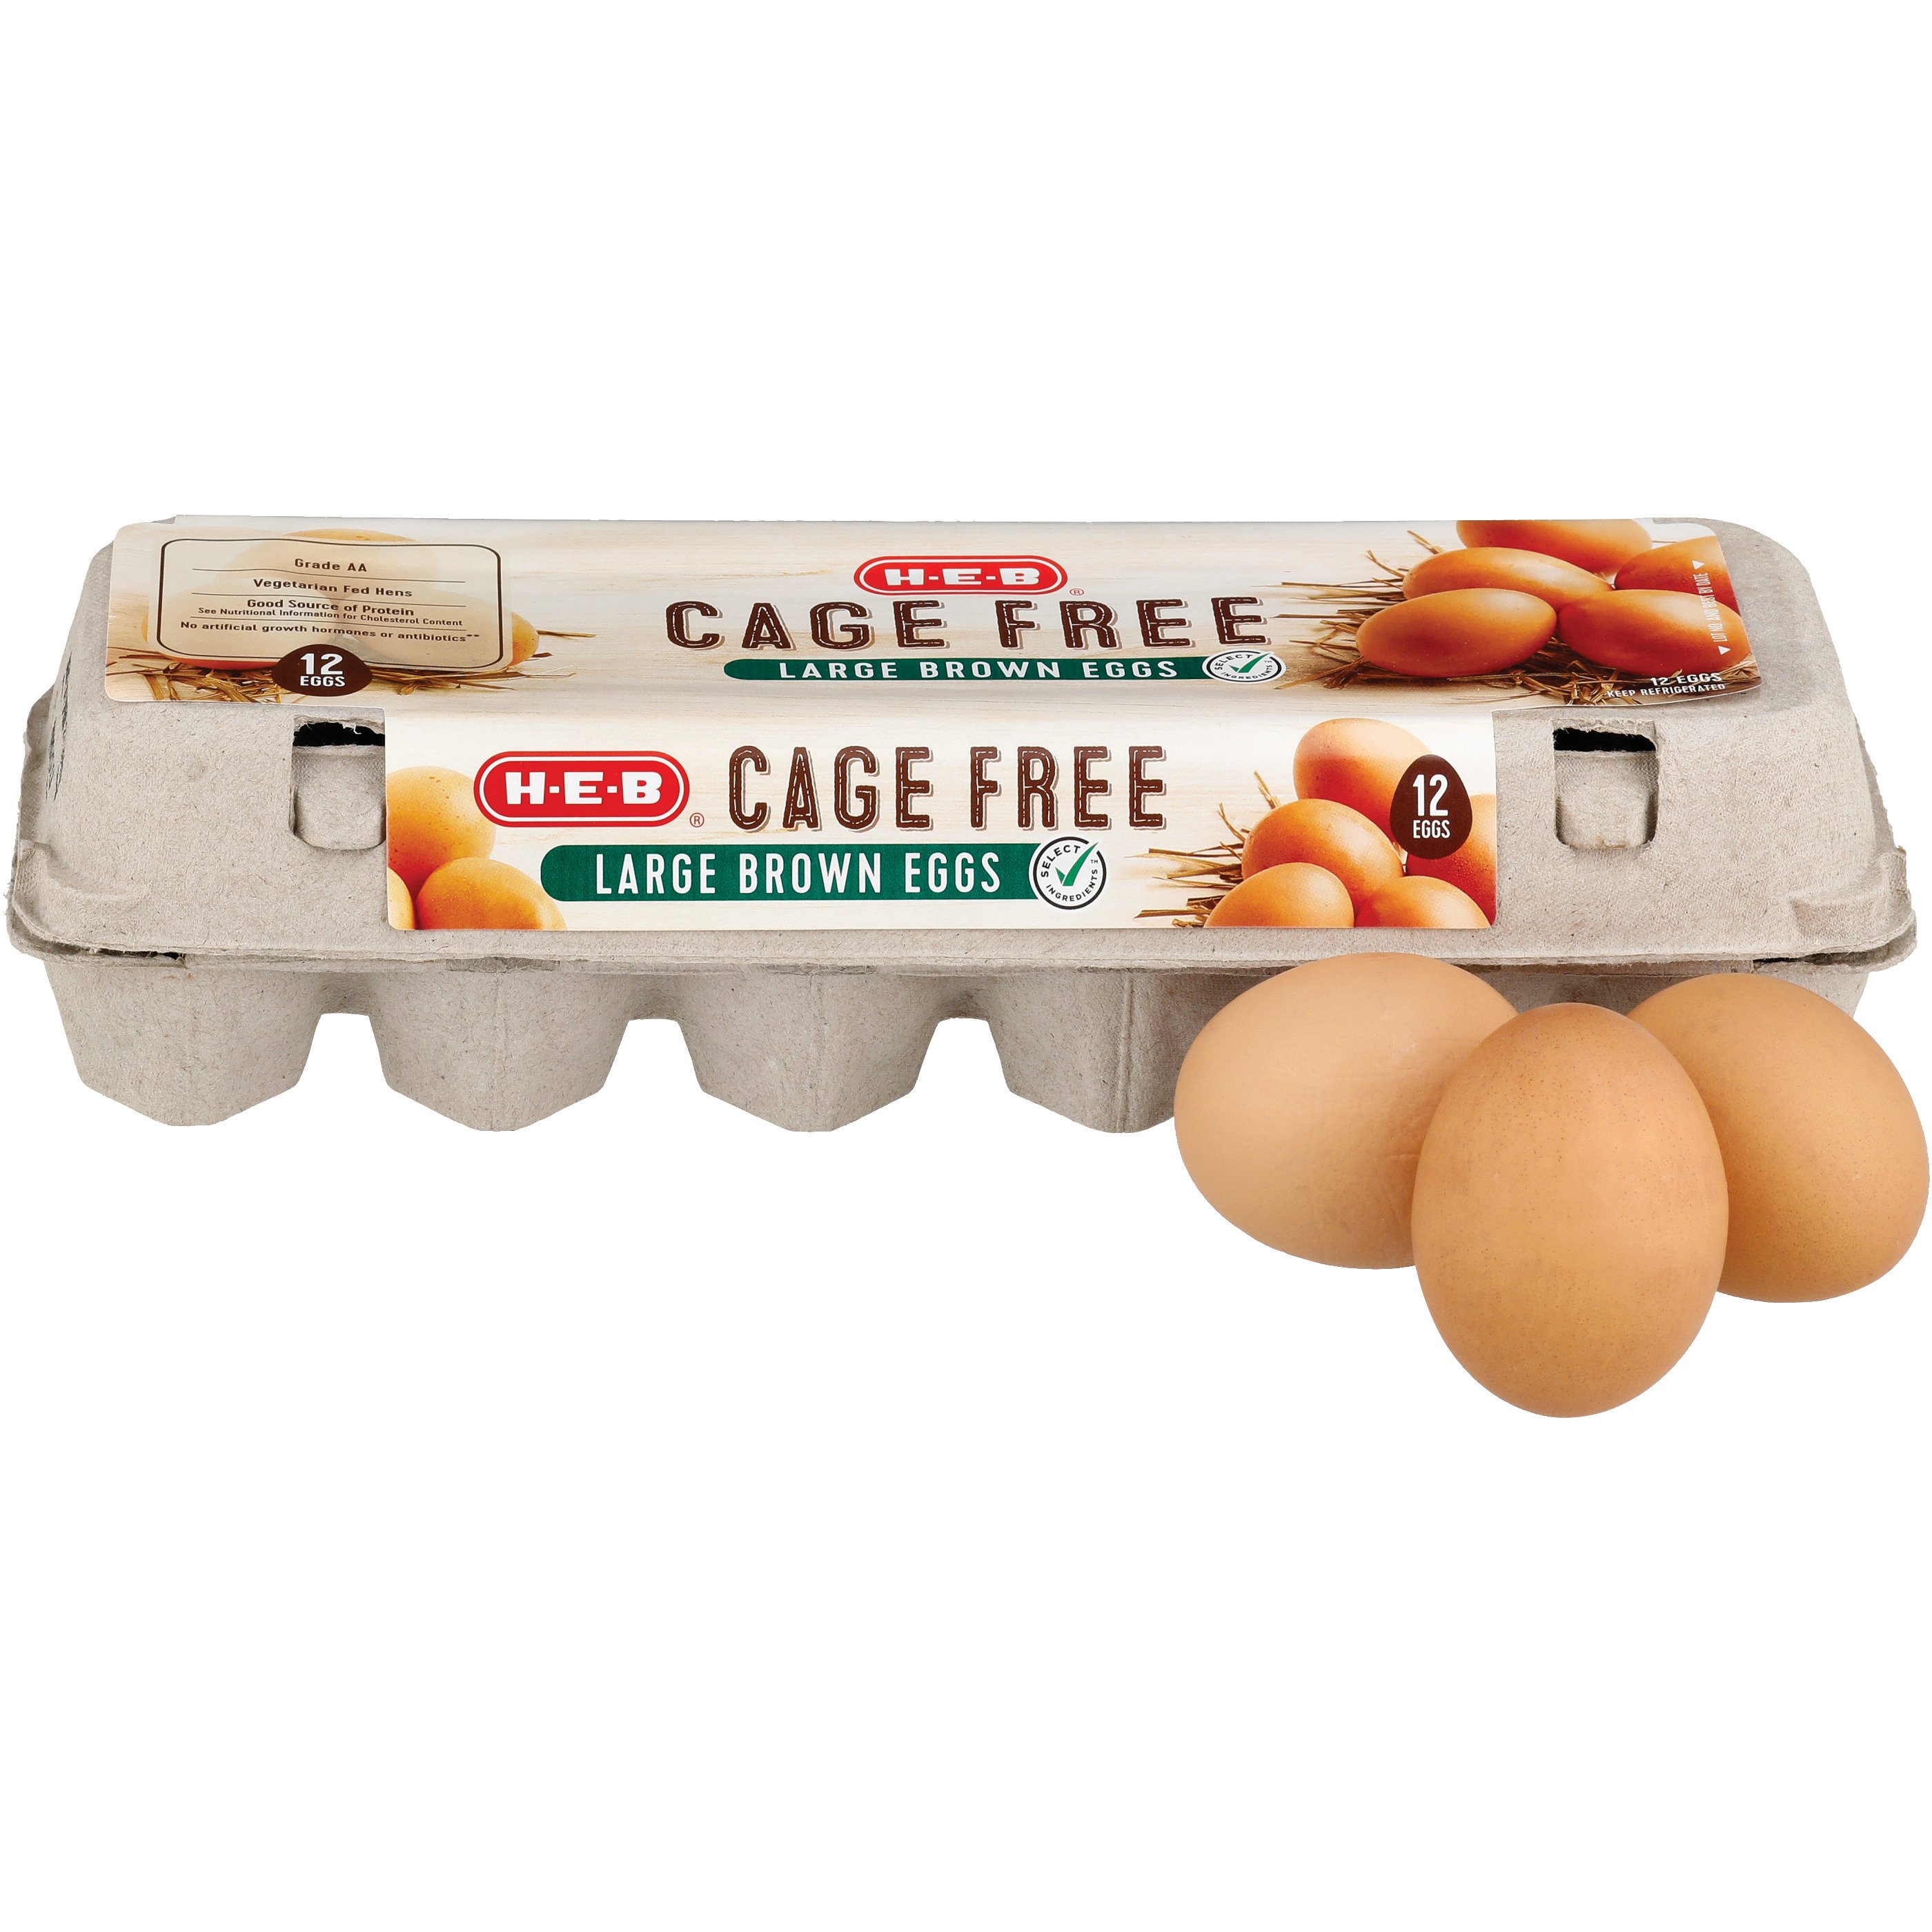 H E B Grade Aa Cage Free Large Brown Eggs Shop Eggs Egg Substitutes At H E B,Dryer Outlet Cover Plate